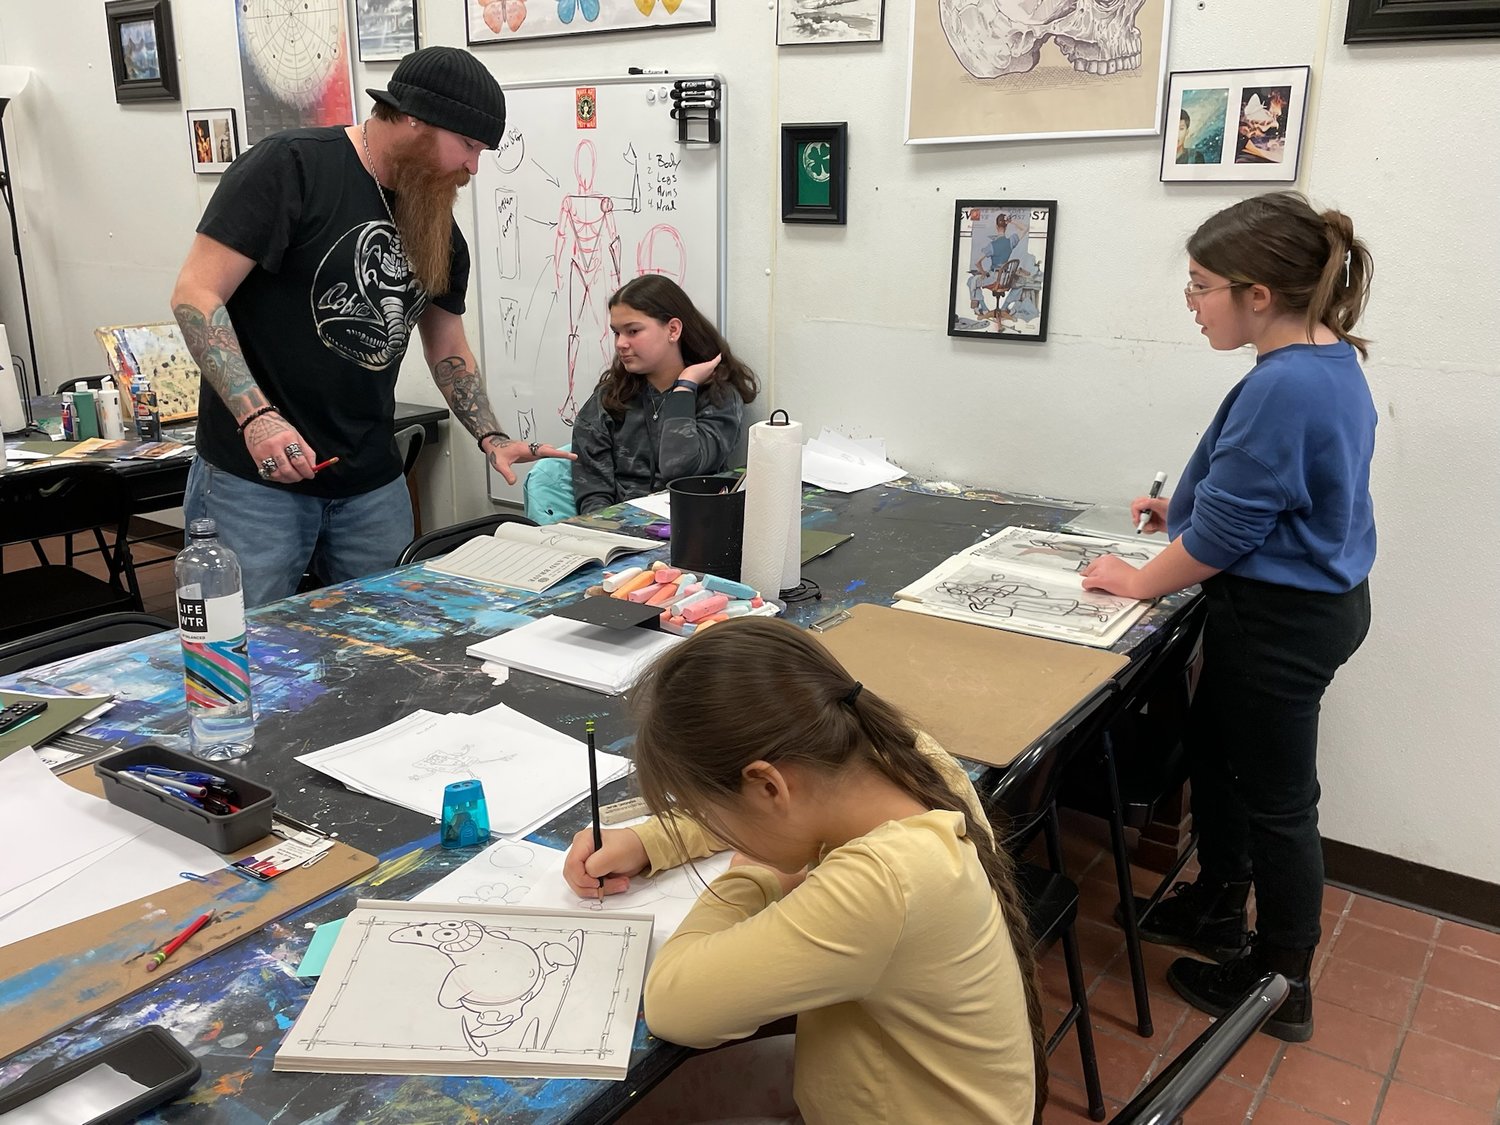 Art Instructor Steve Snegon, owner of E-98 Art Studio & Gallery, 5819 Rome-Taberg Road, Rome, provides young artists with some guidance on their art pieces at the studio.